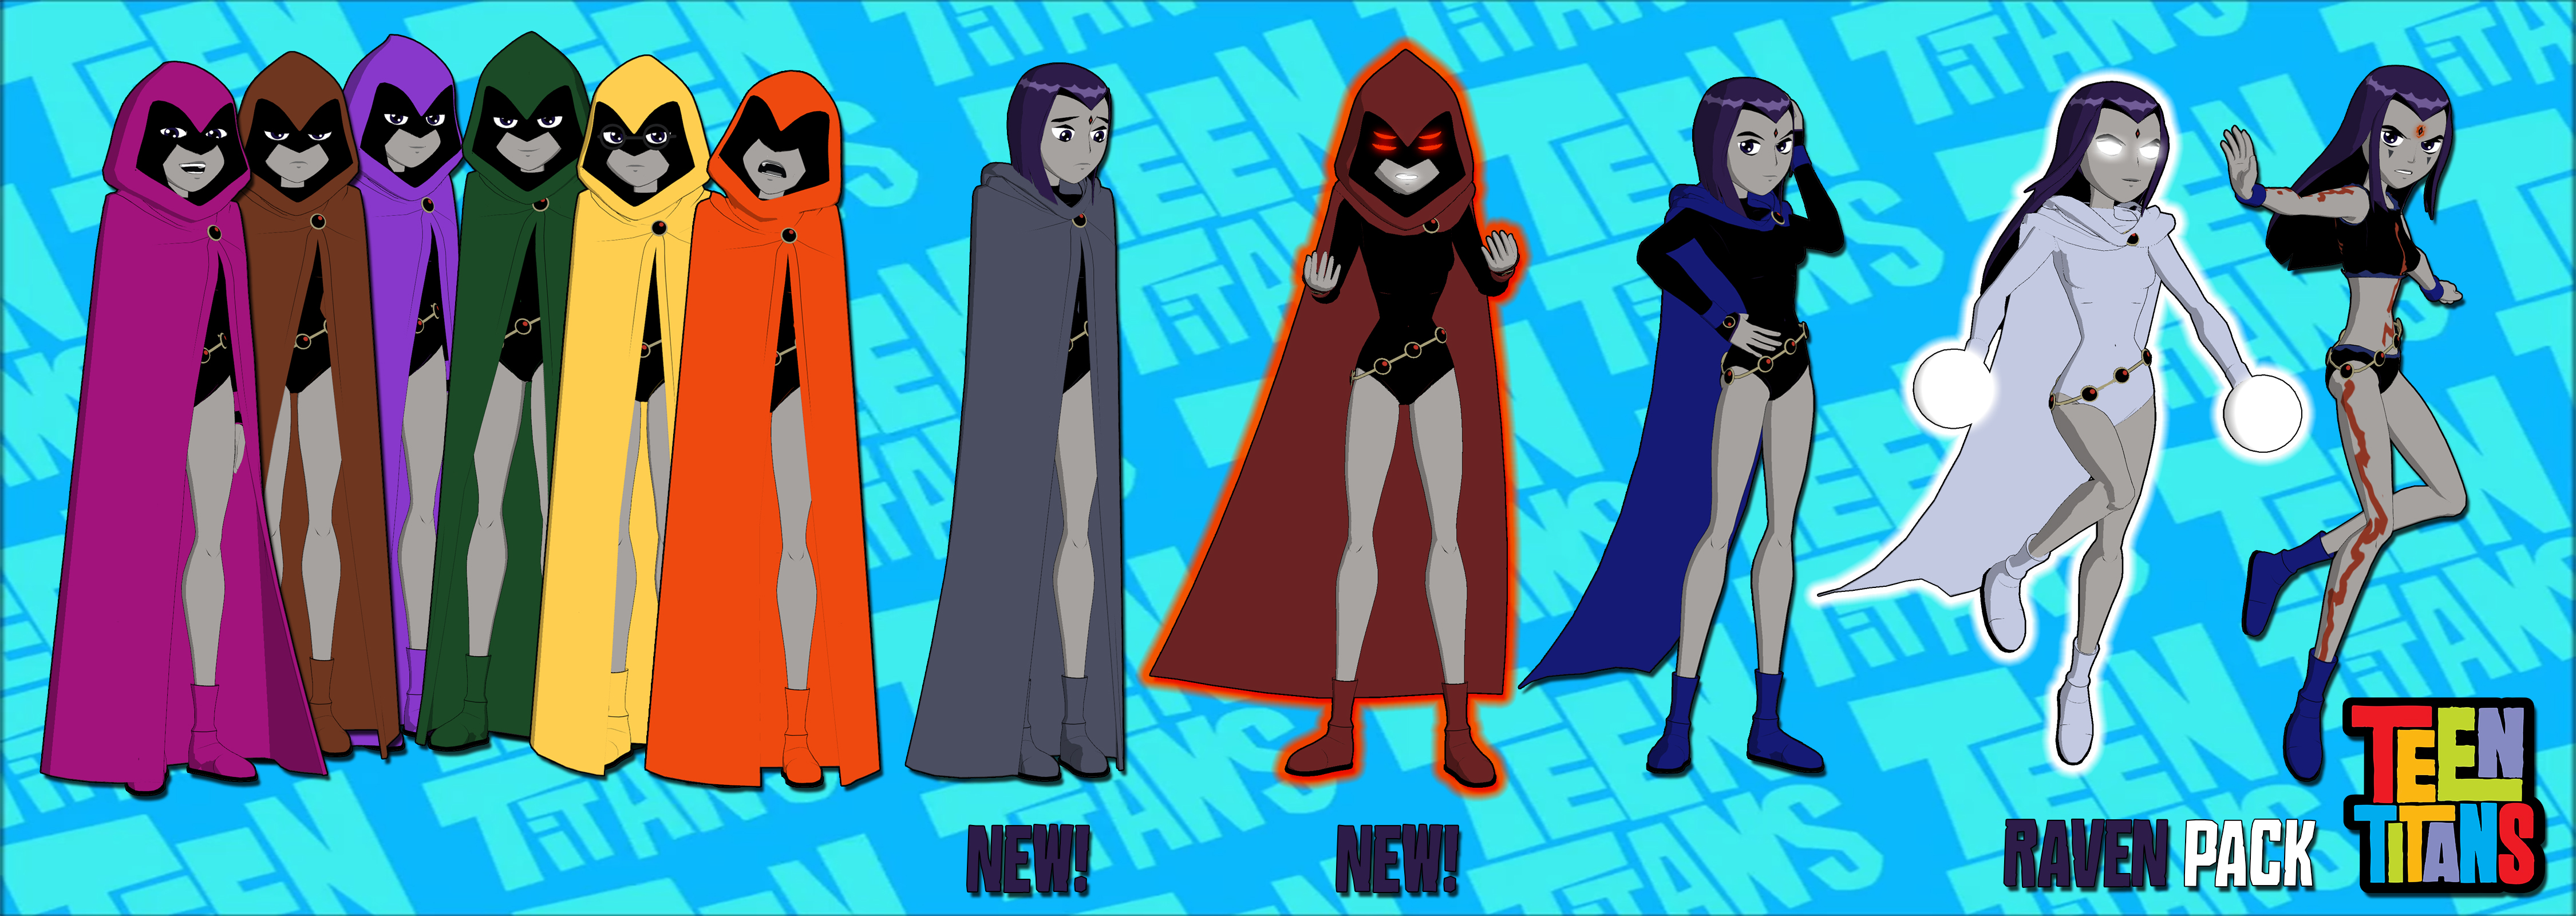 Teen Titans Pack 2: Raven FOR XPS by ASideOfChidori on DeviantArt